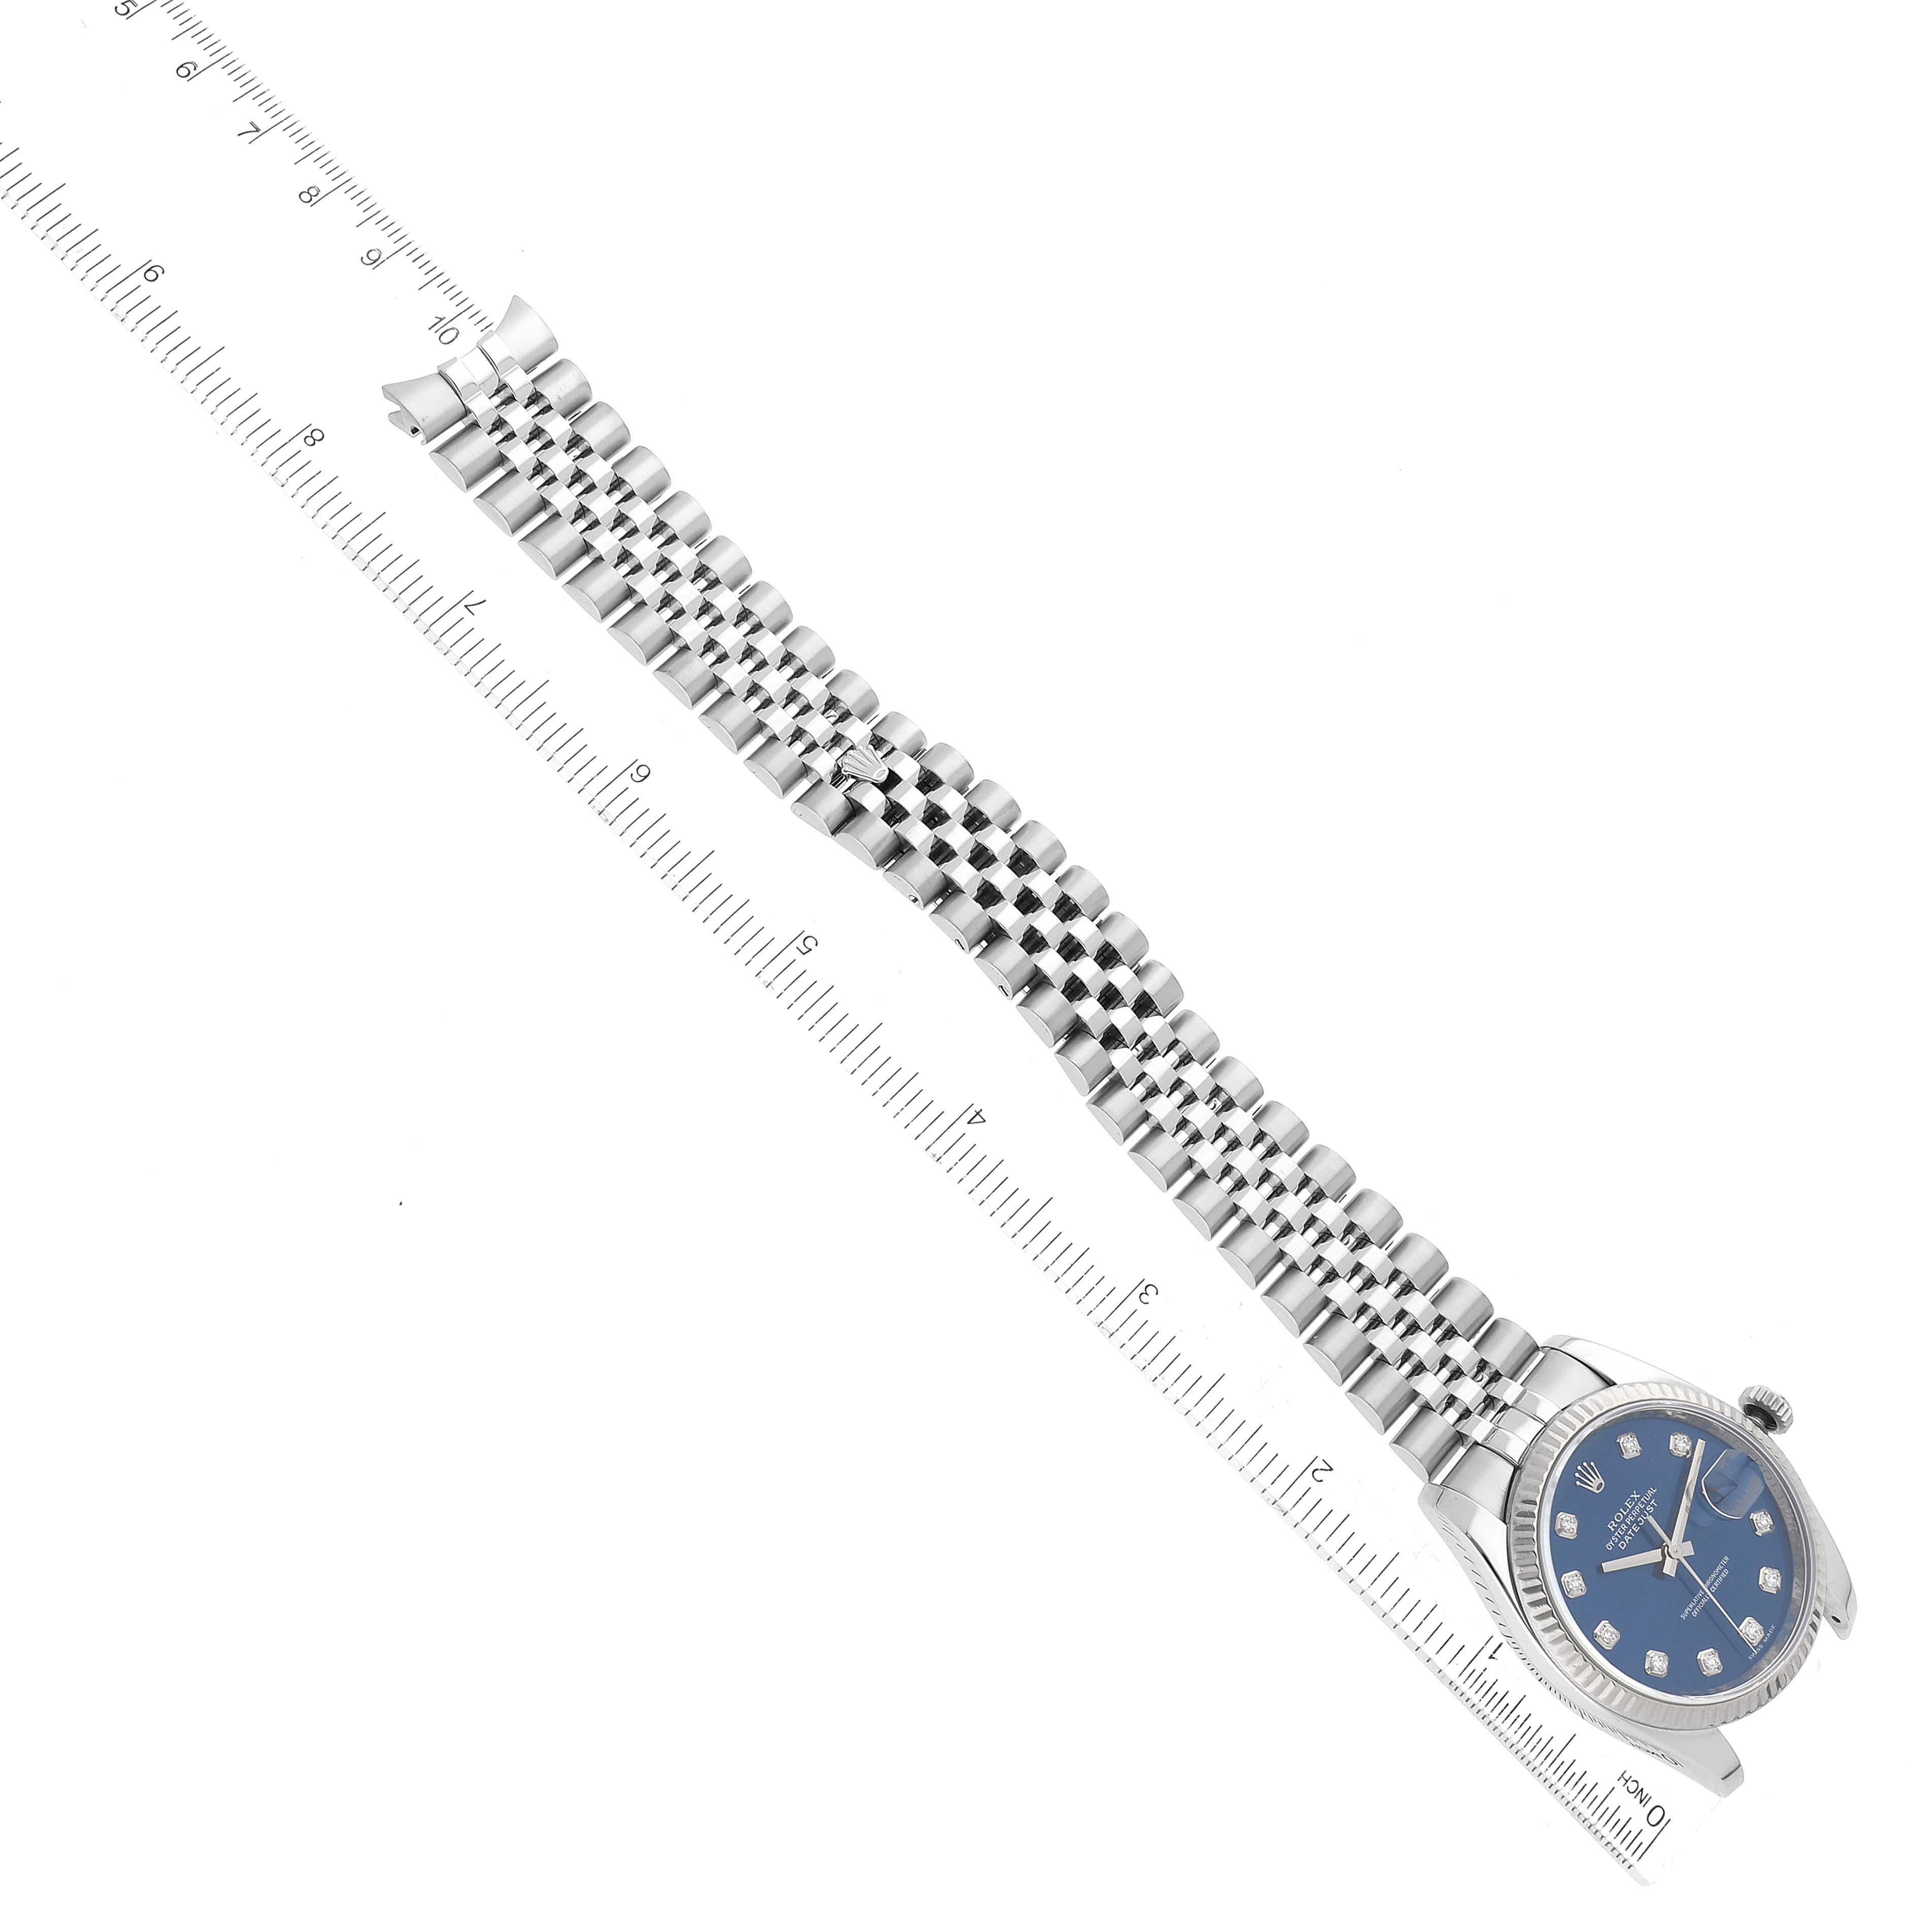 Rolex Datejust Steel White Gold Blue Diamond Dial Mens Watch 116234 For Sale 6